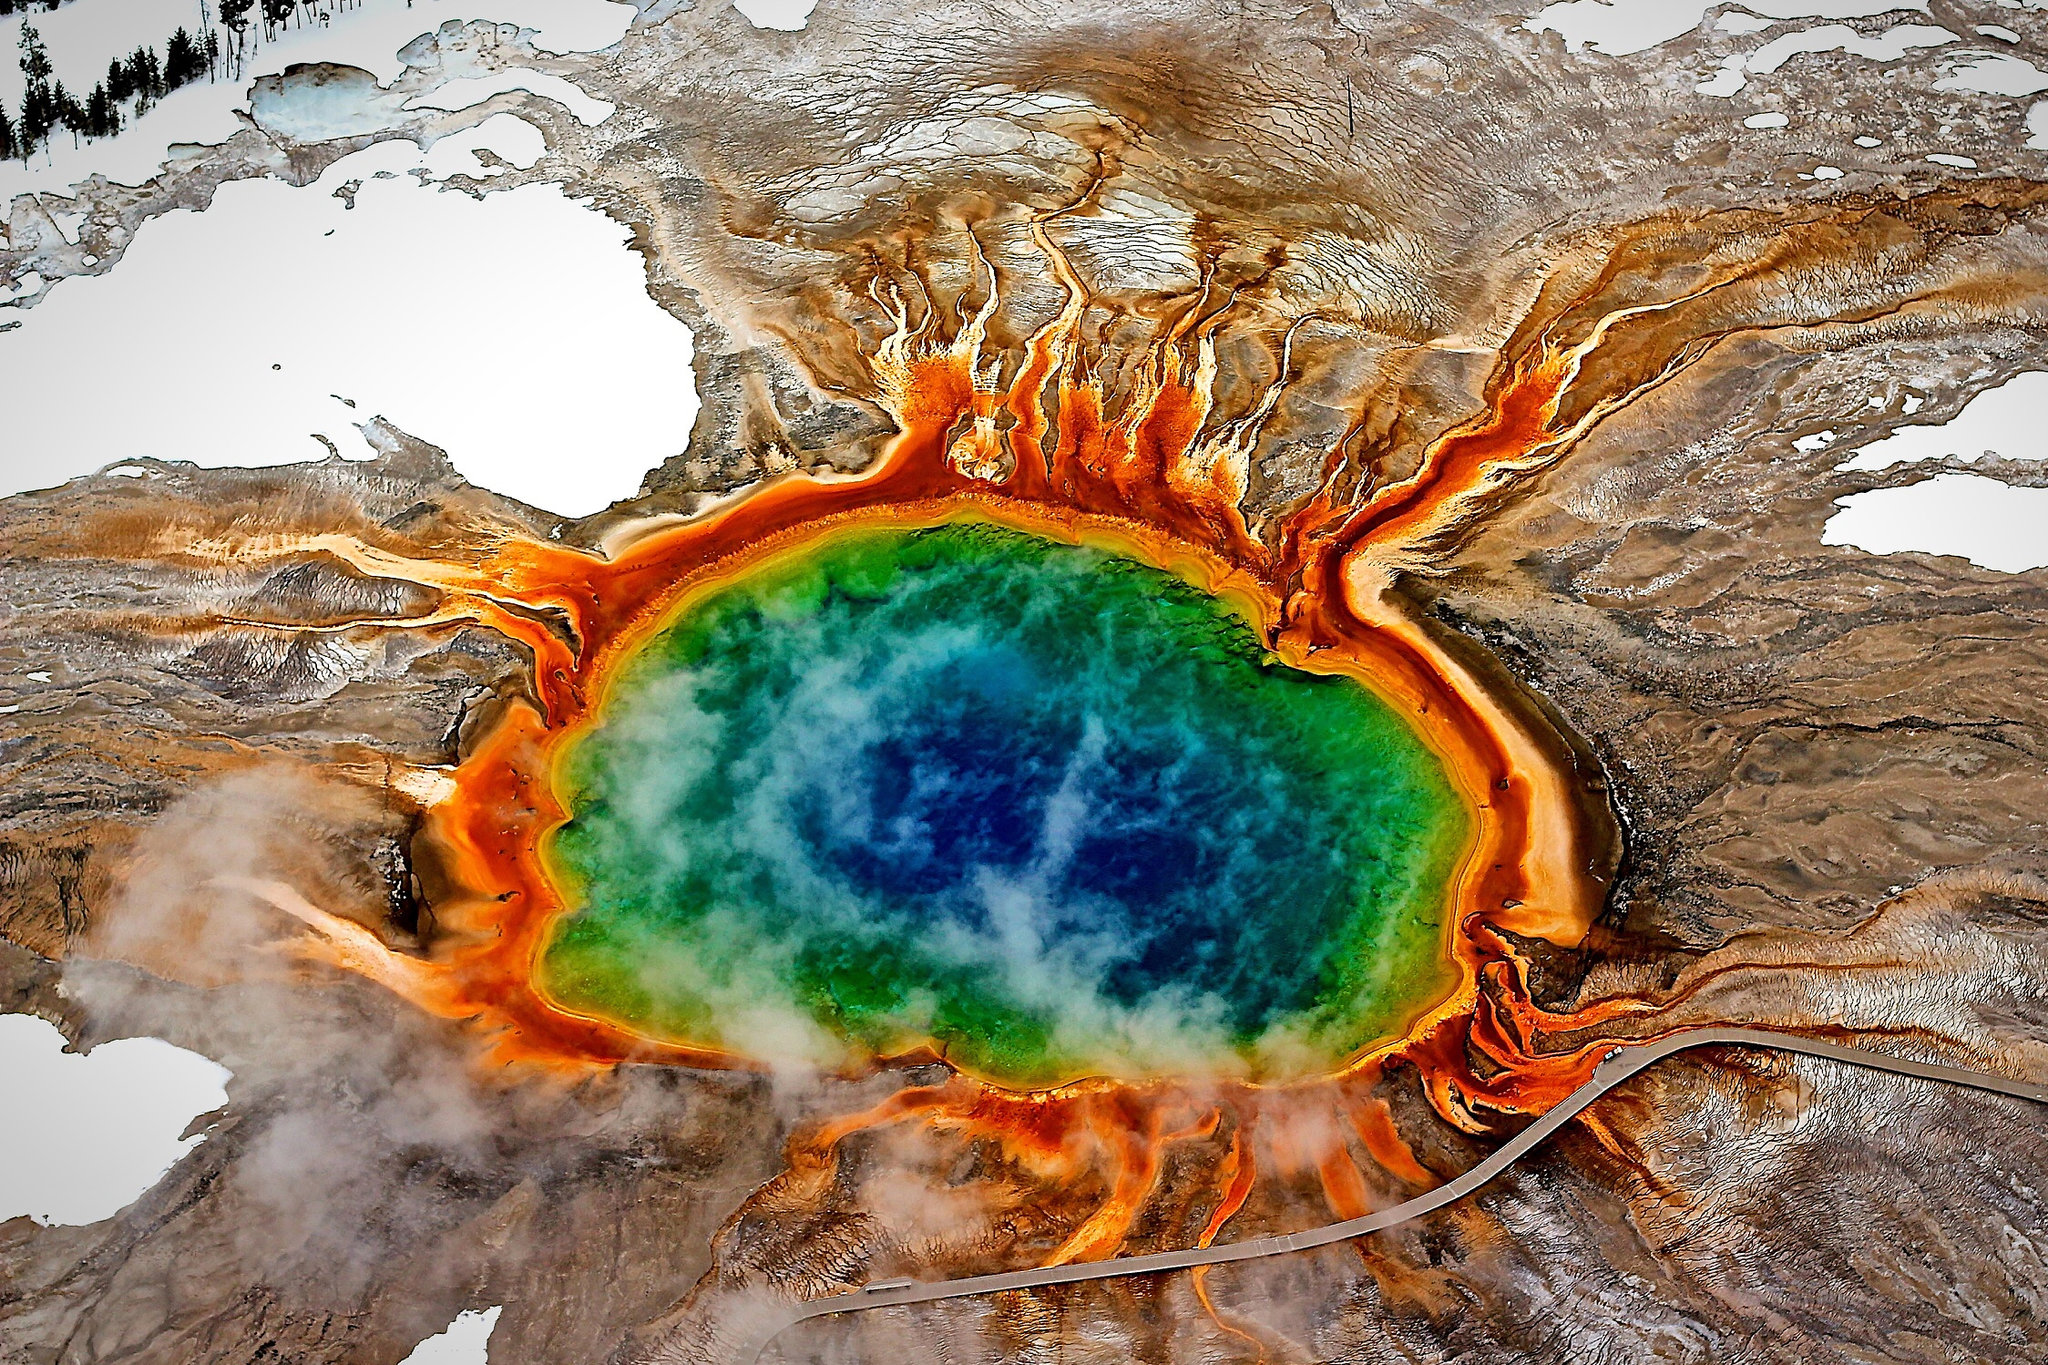 Does Yellowstone National Park Have A Volcano?